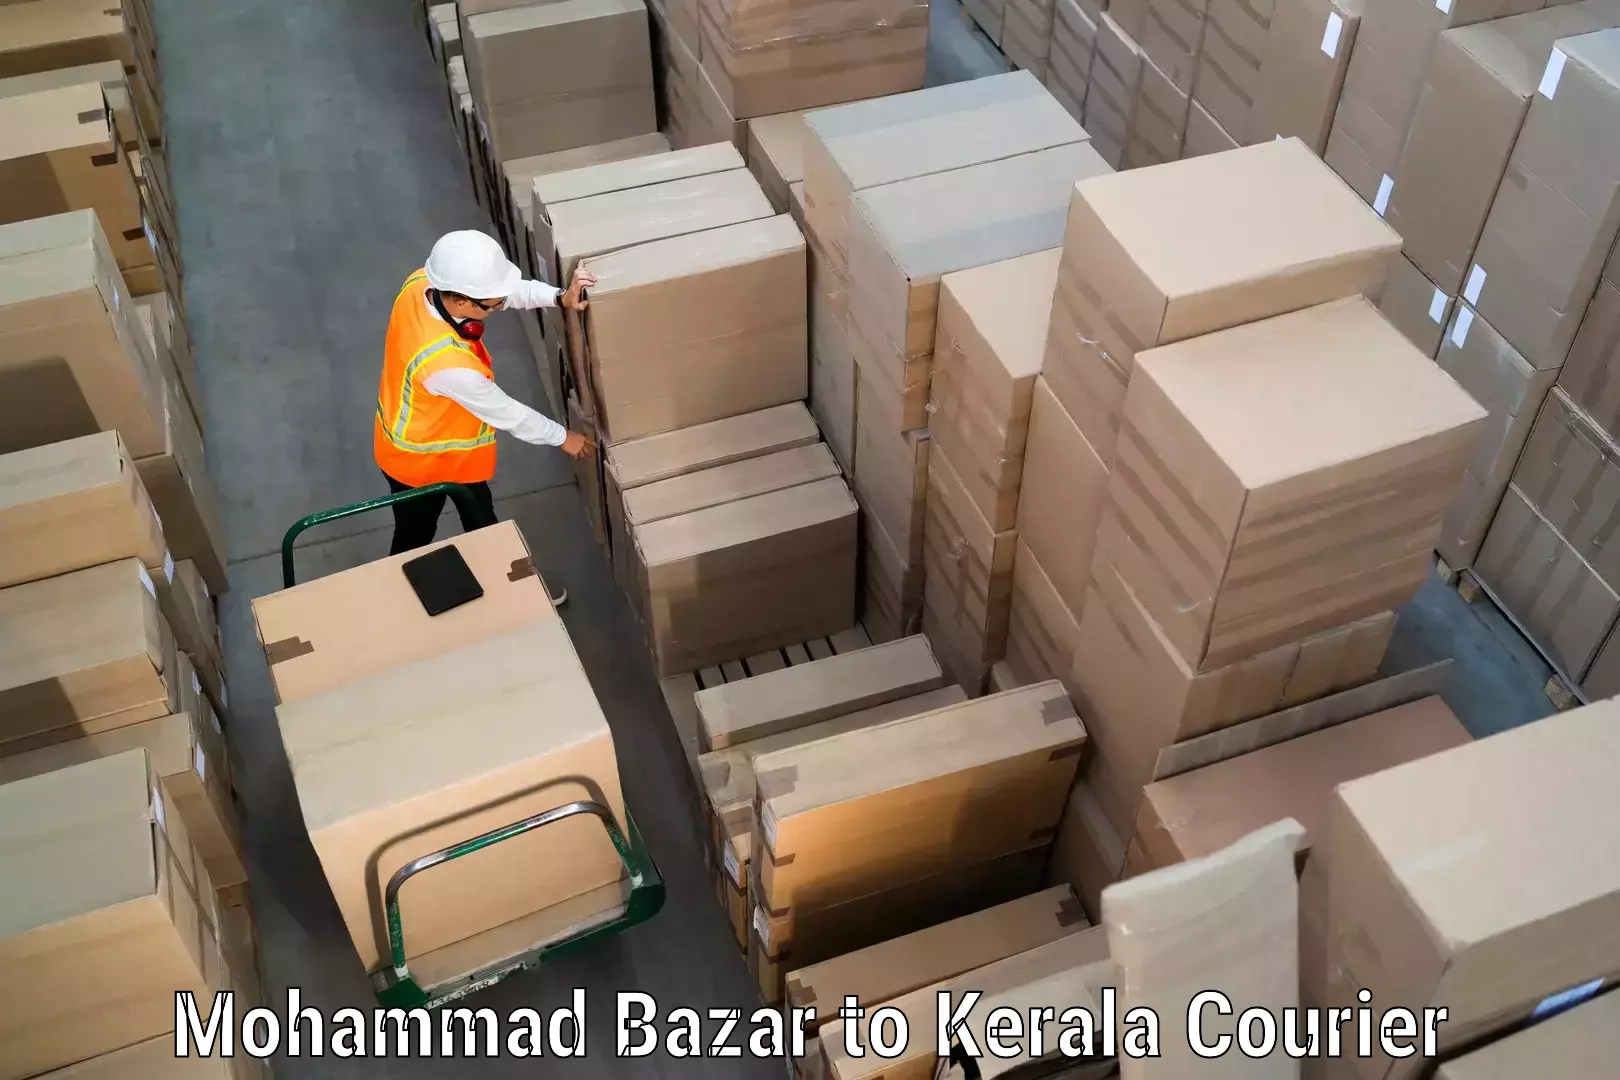 Global shipping networks Mohammad Bazar to Kerala